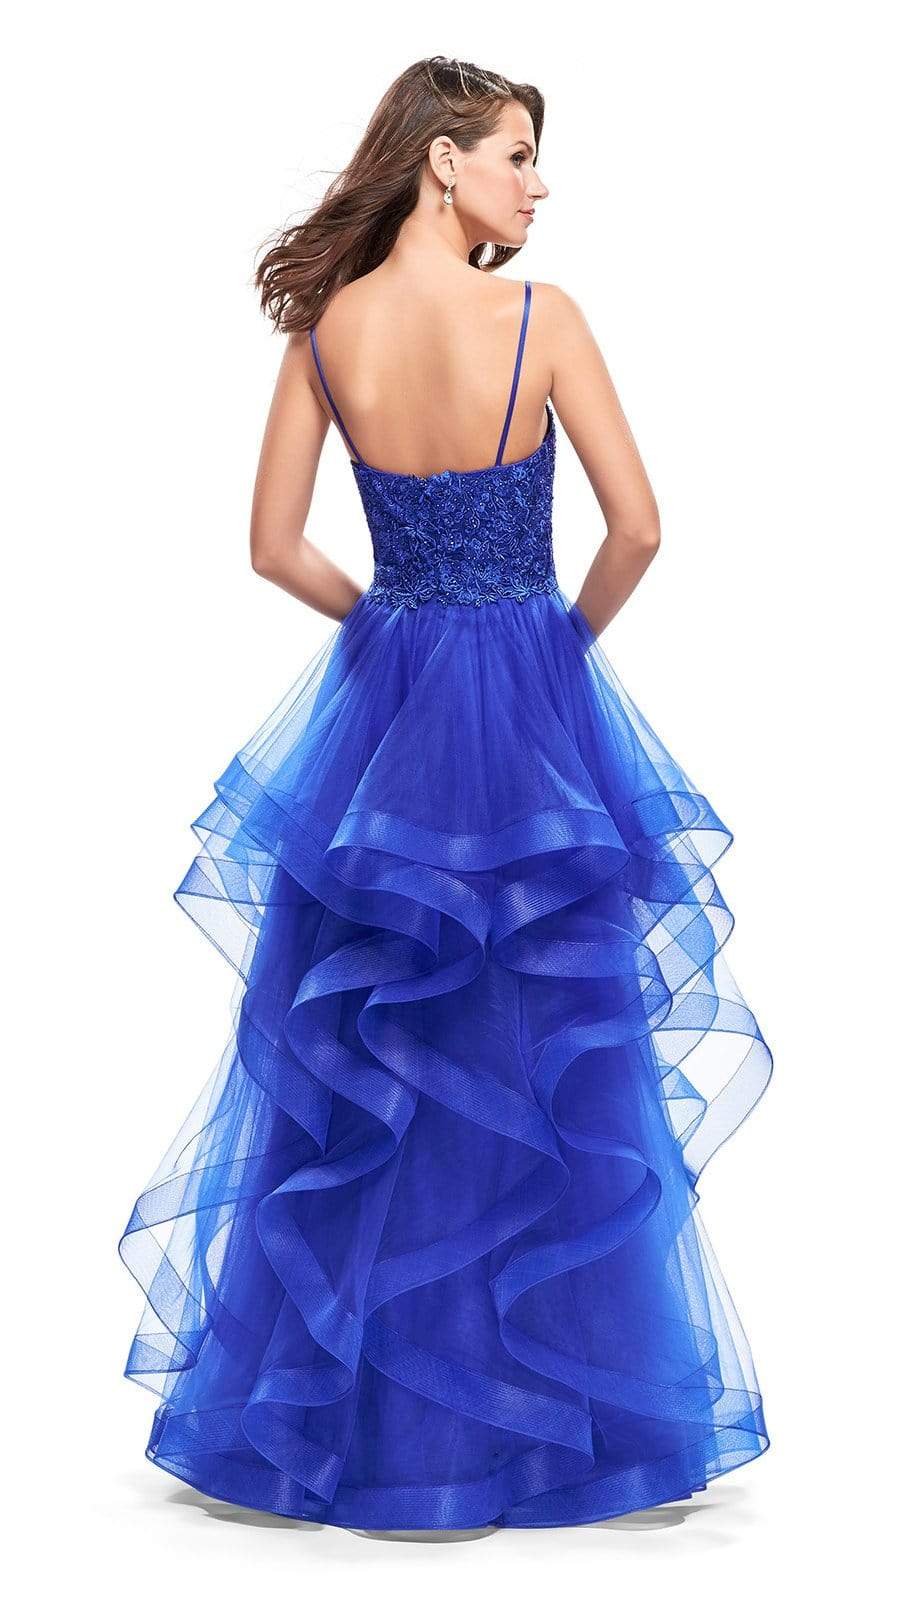 La Femme - Beaded Lace Plunging Sweetheart Ruffled Dress 25857SC - 2 pcs Sapphire Blue in Size 4 and 14 Available CCSALE